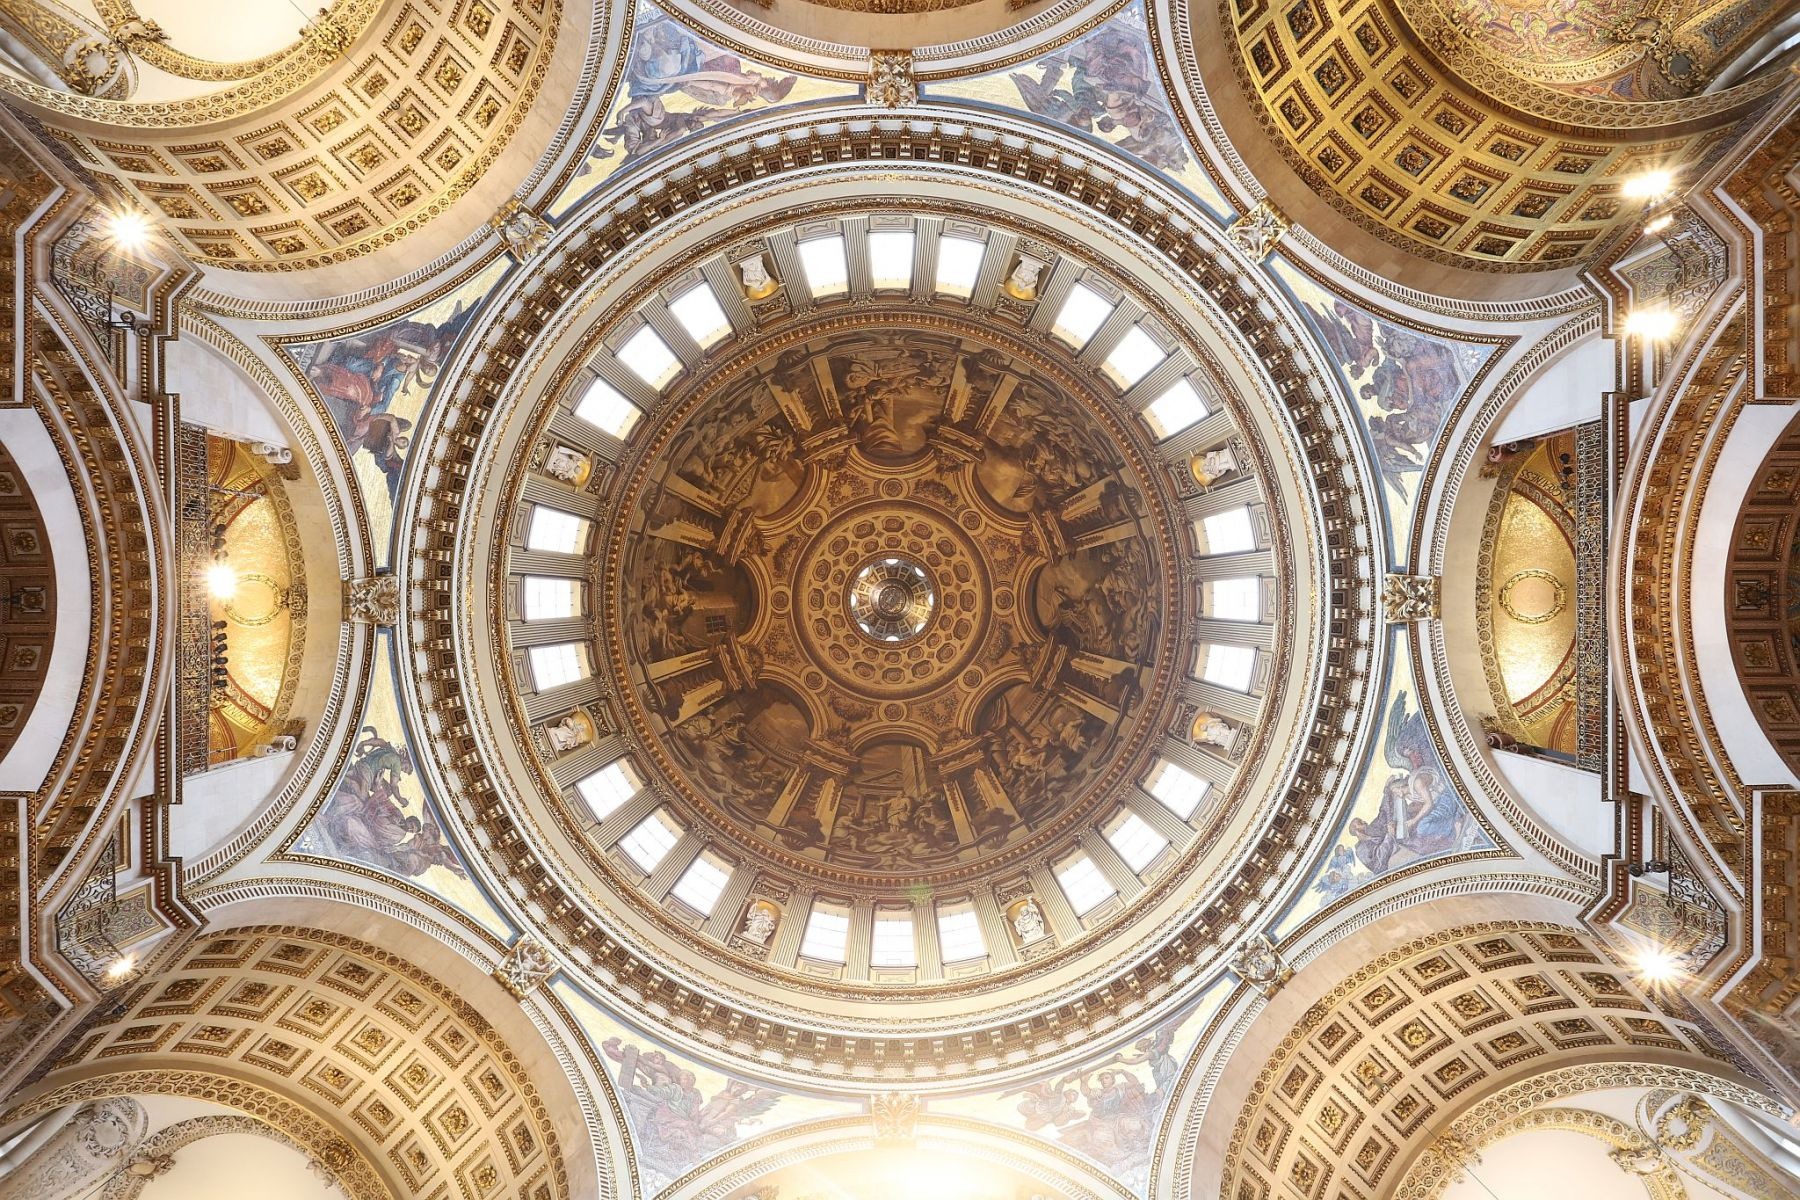 Interior of the dome and whispering gallery of St. Paul's cathedral built by Sir Christopher Wren in London.  Seen from the cathedral floor, looking straight up. 29-Oct-2022.